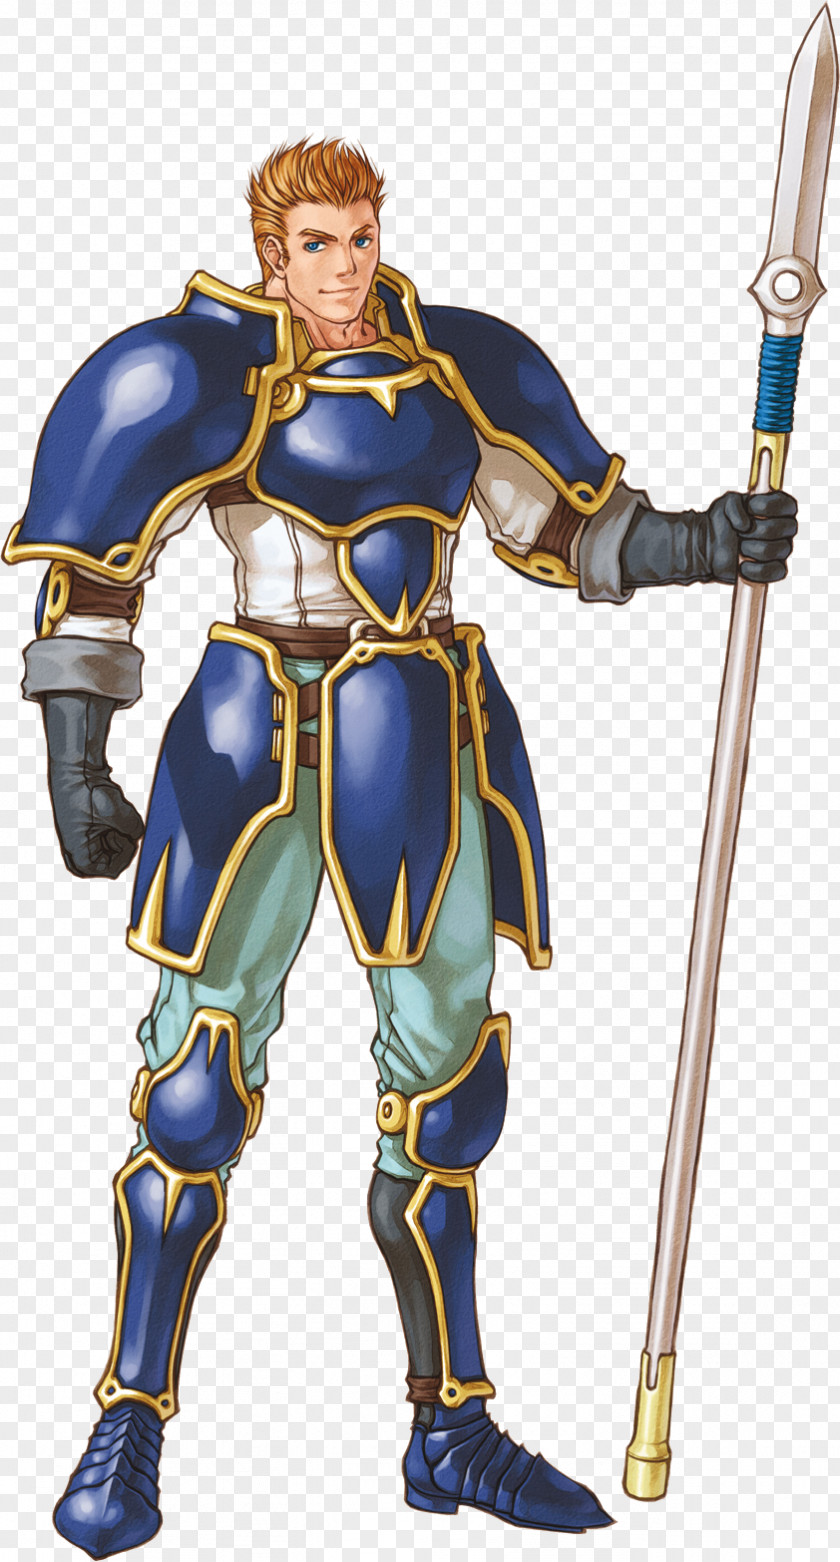 Fire Radiance Emblem: Path Of Radiant Dawn Video Game Marth PNG